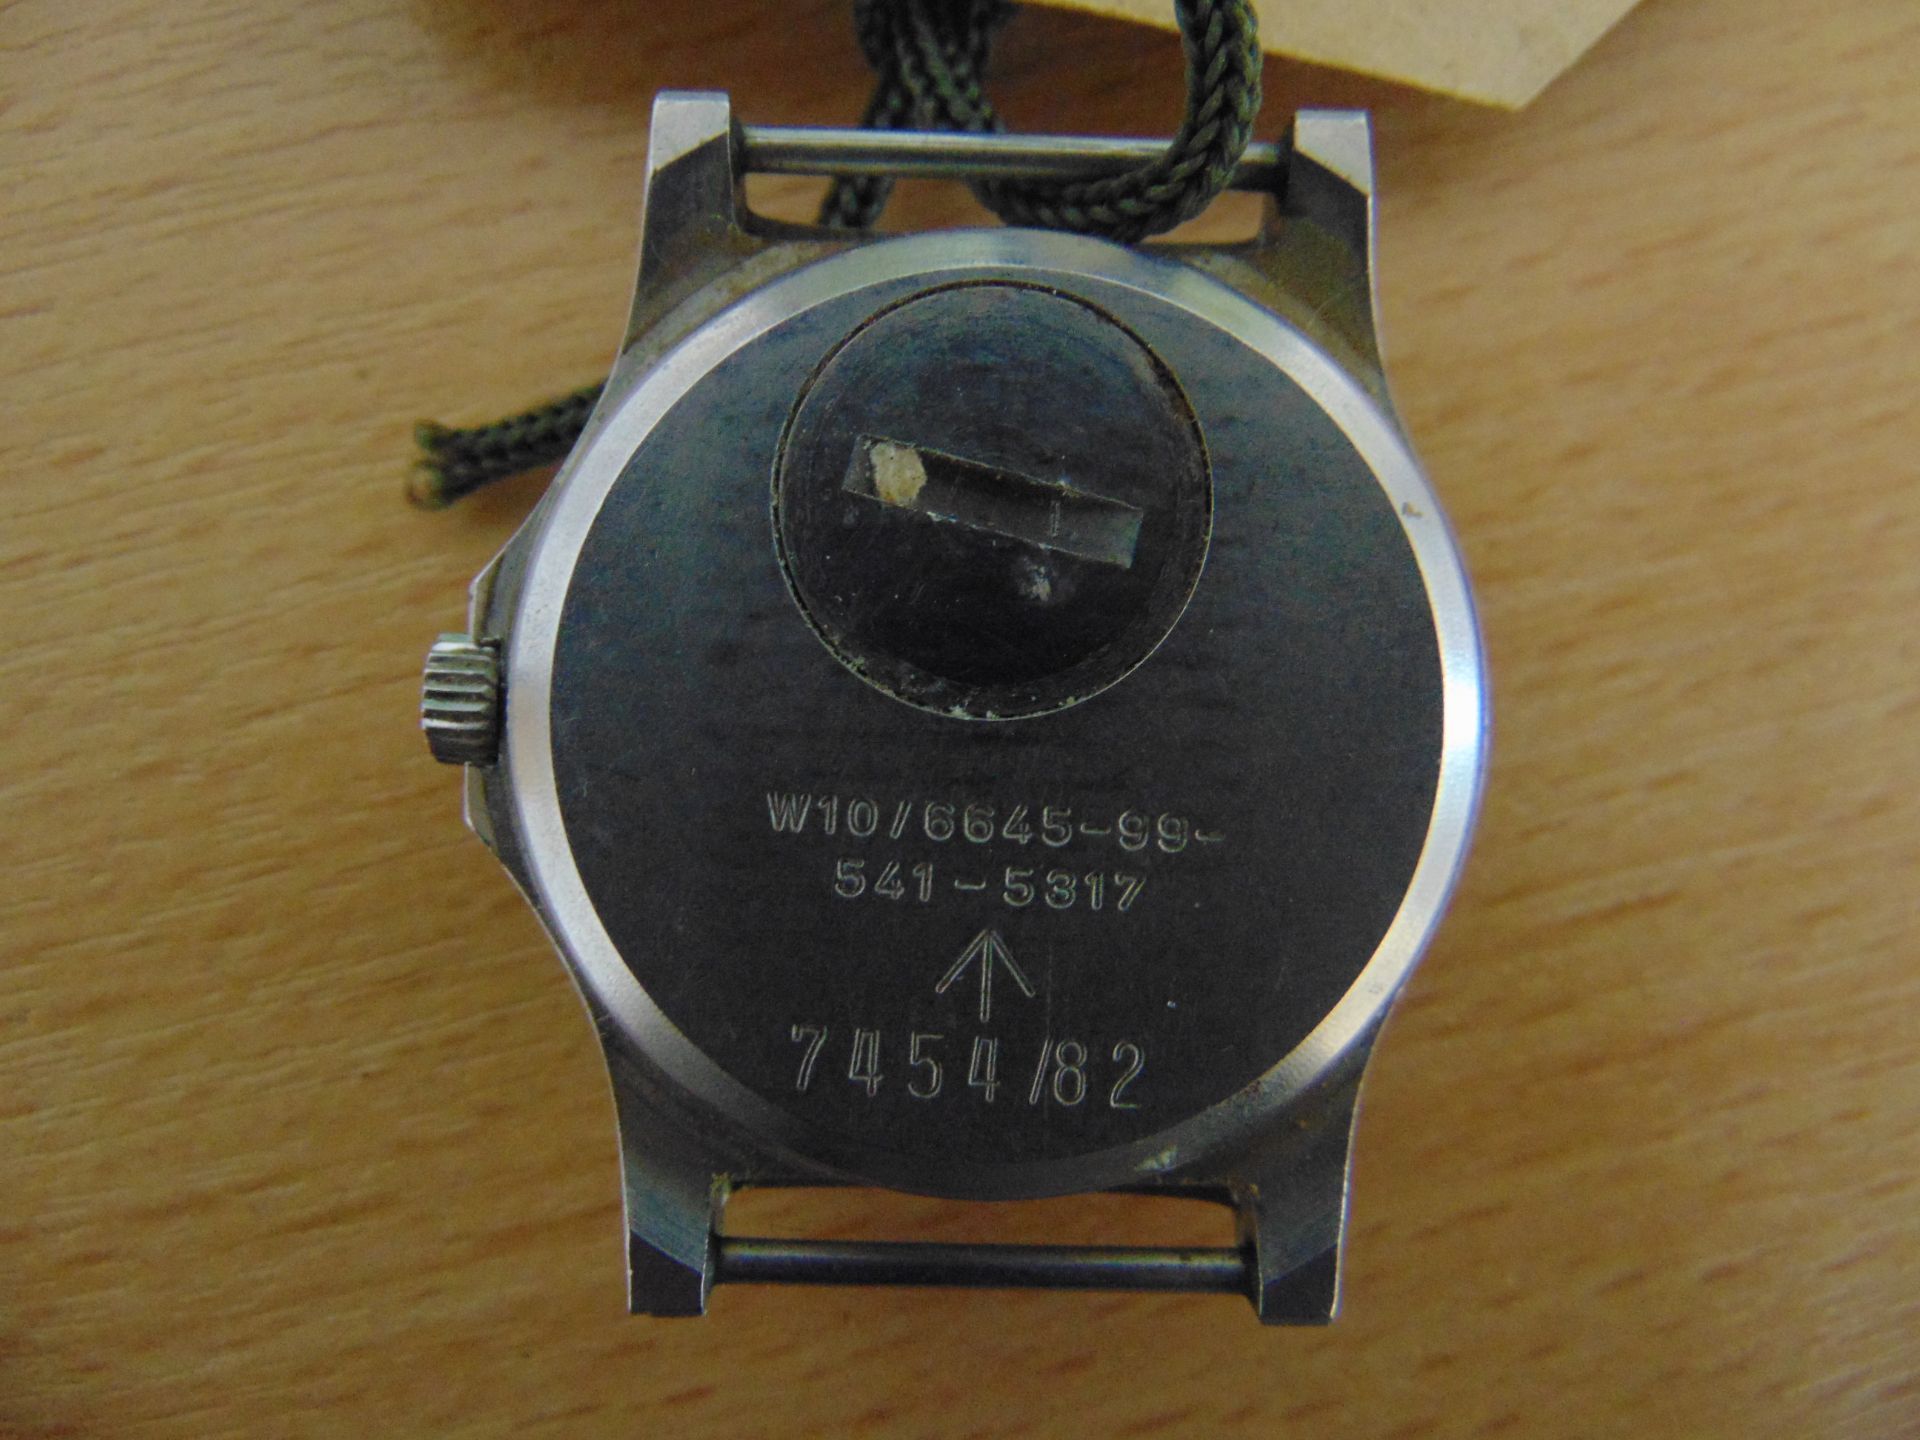 RARE CWC FAT BOY W10 BRITISH ARMY SERVICE WATCH NATO NUMBERS DATE 1982 FALKLANDS WAR GLASS SCRATCHED - Image 3 of 8